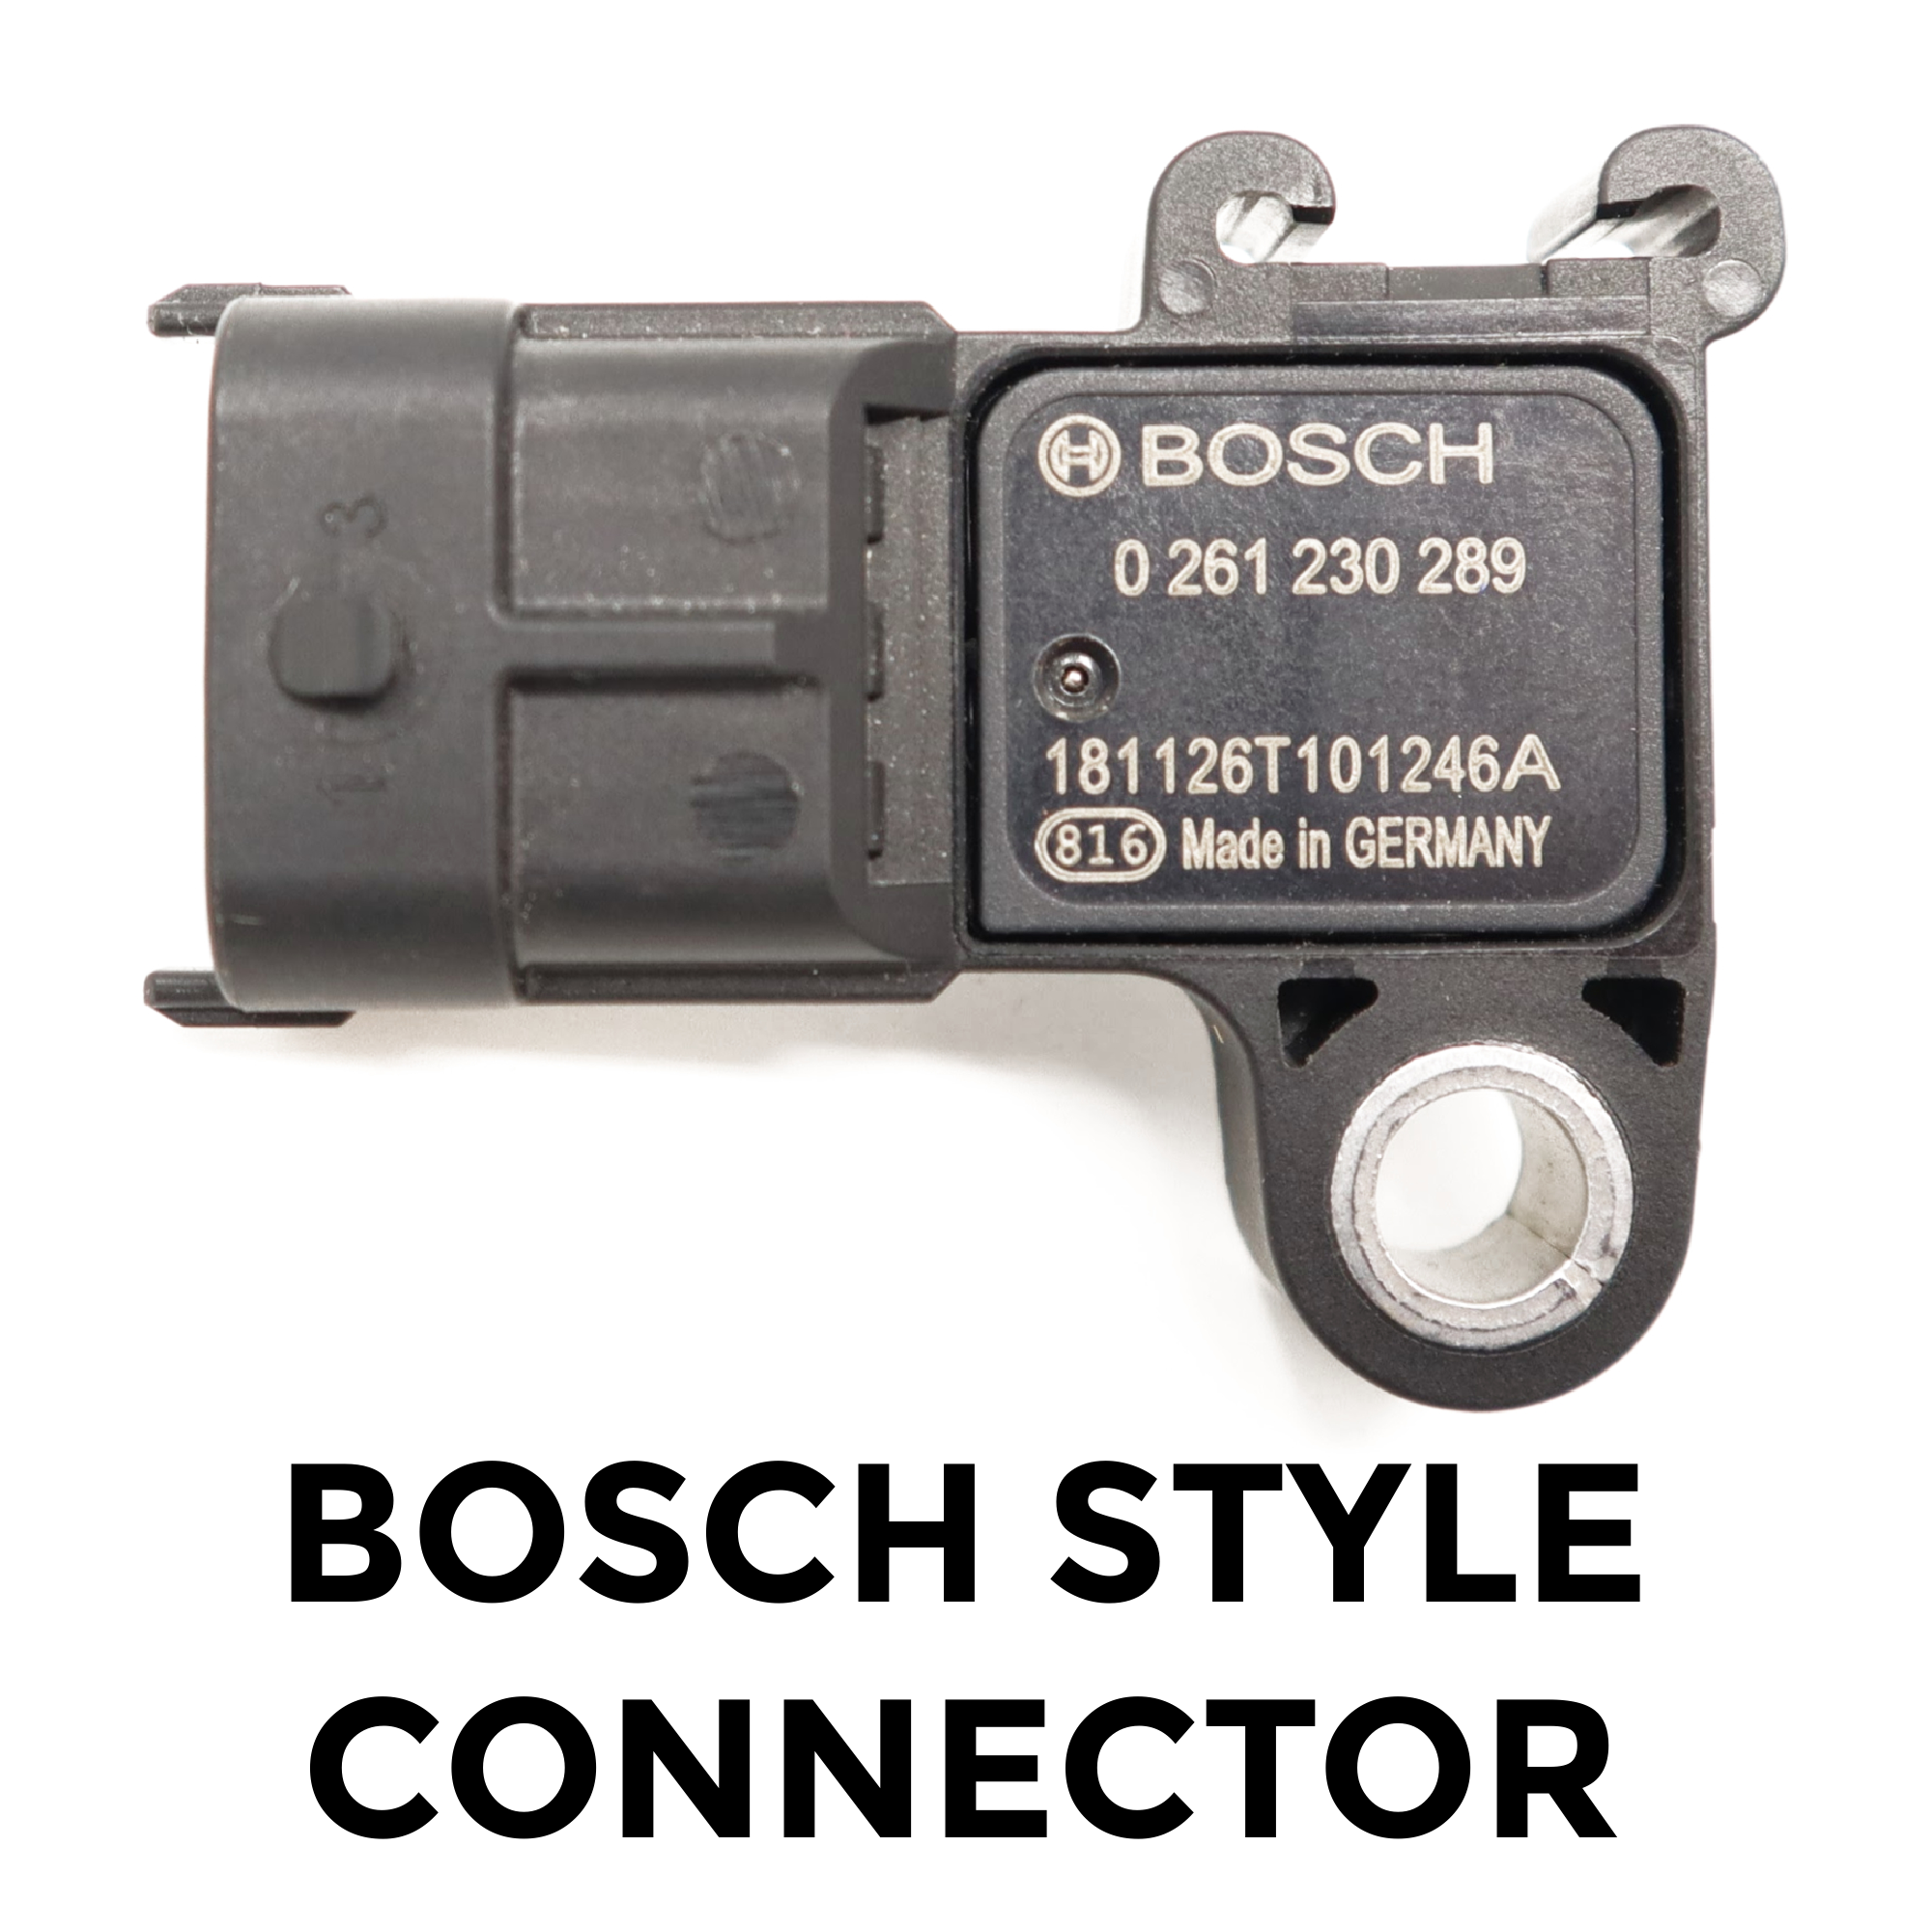 Bosch Style Connector $0.00